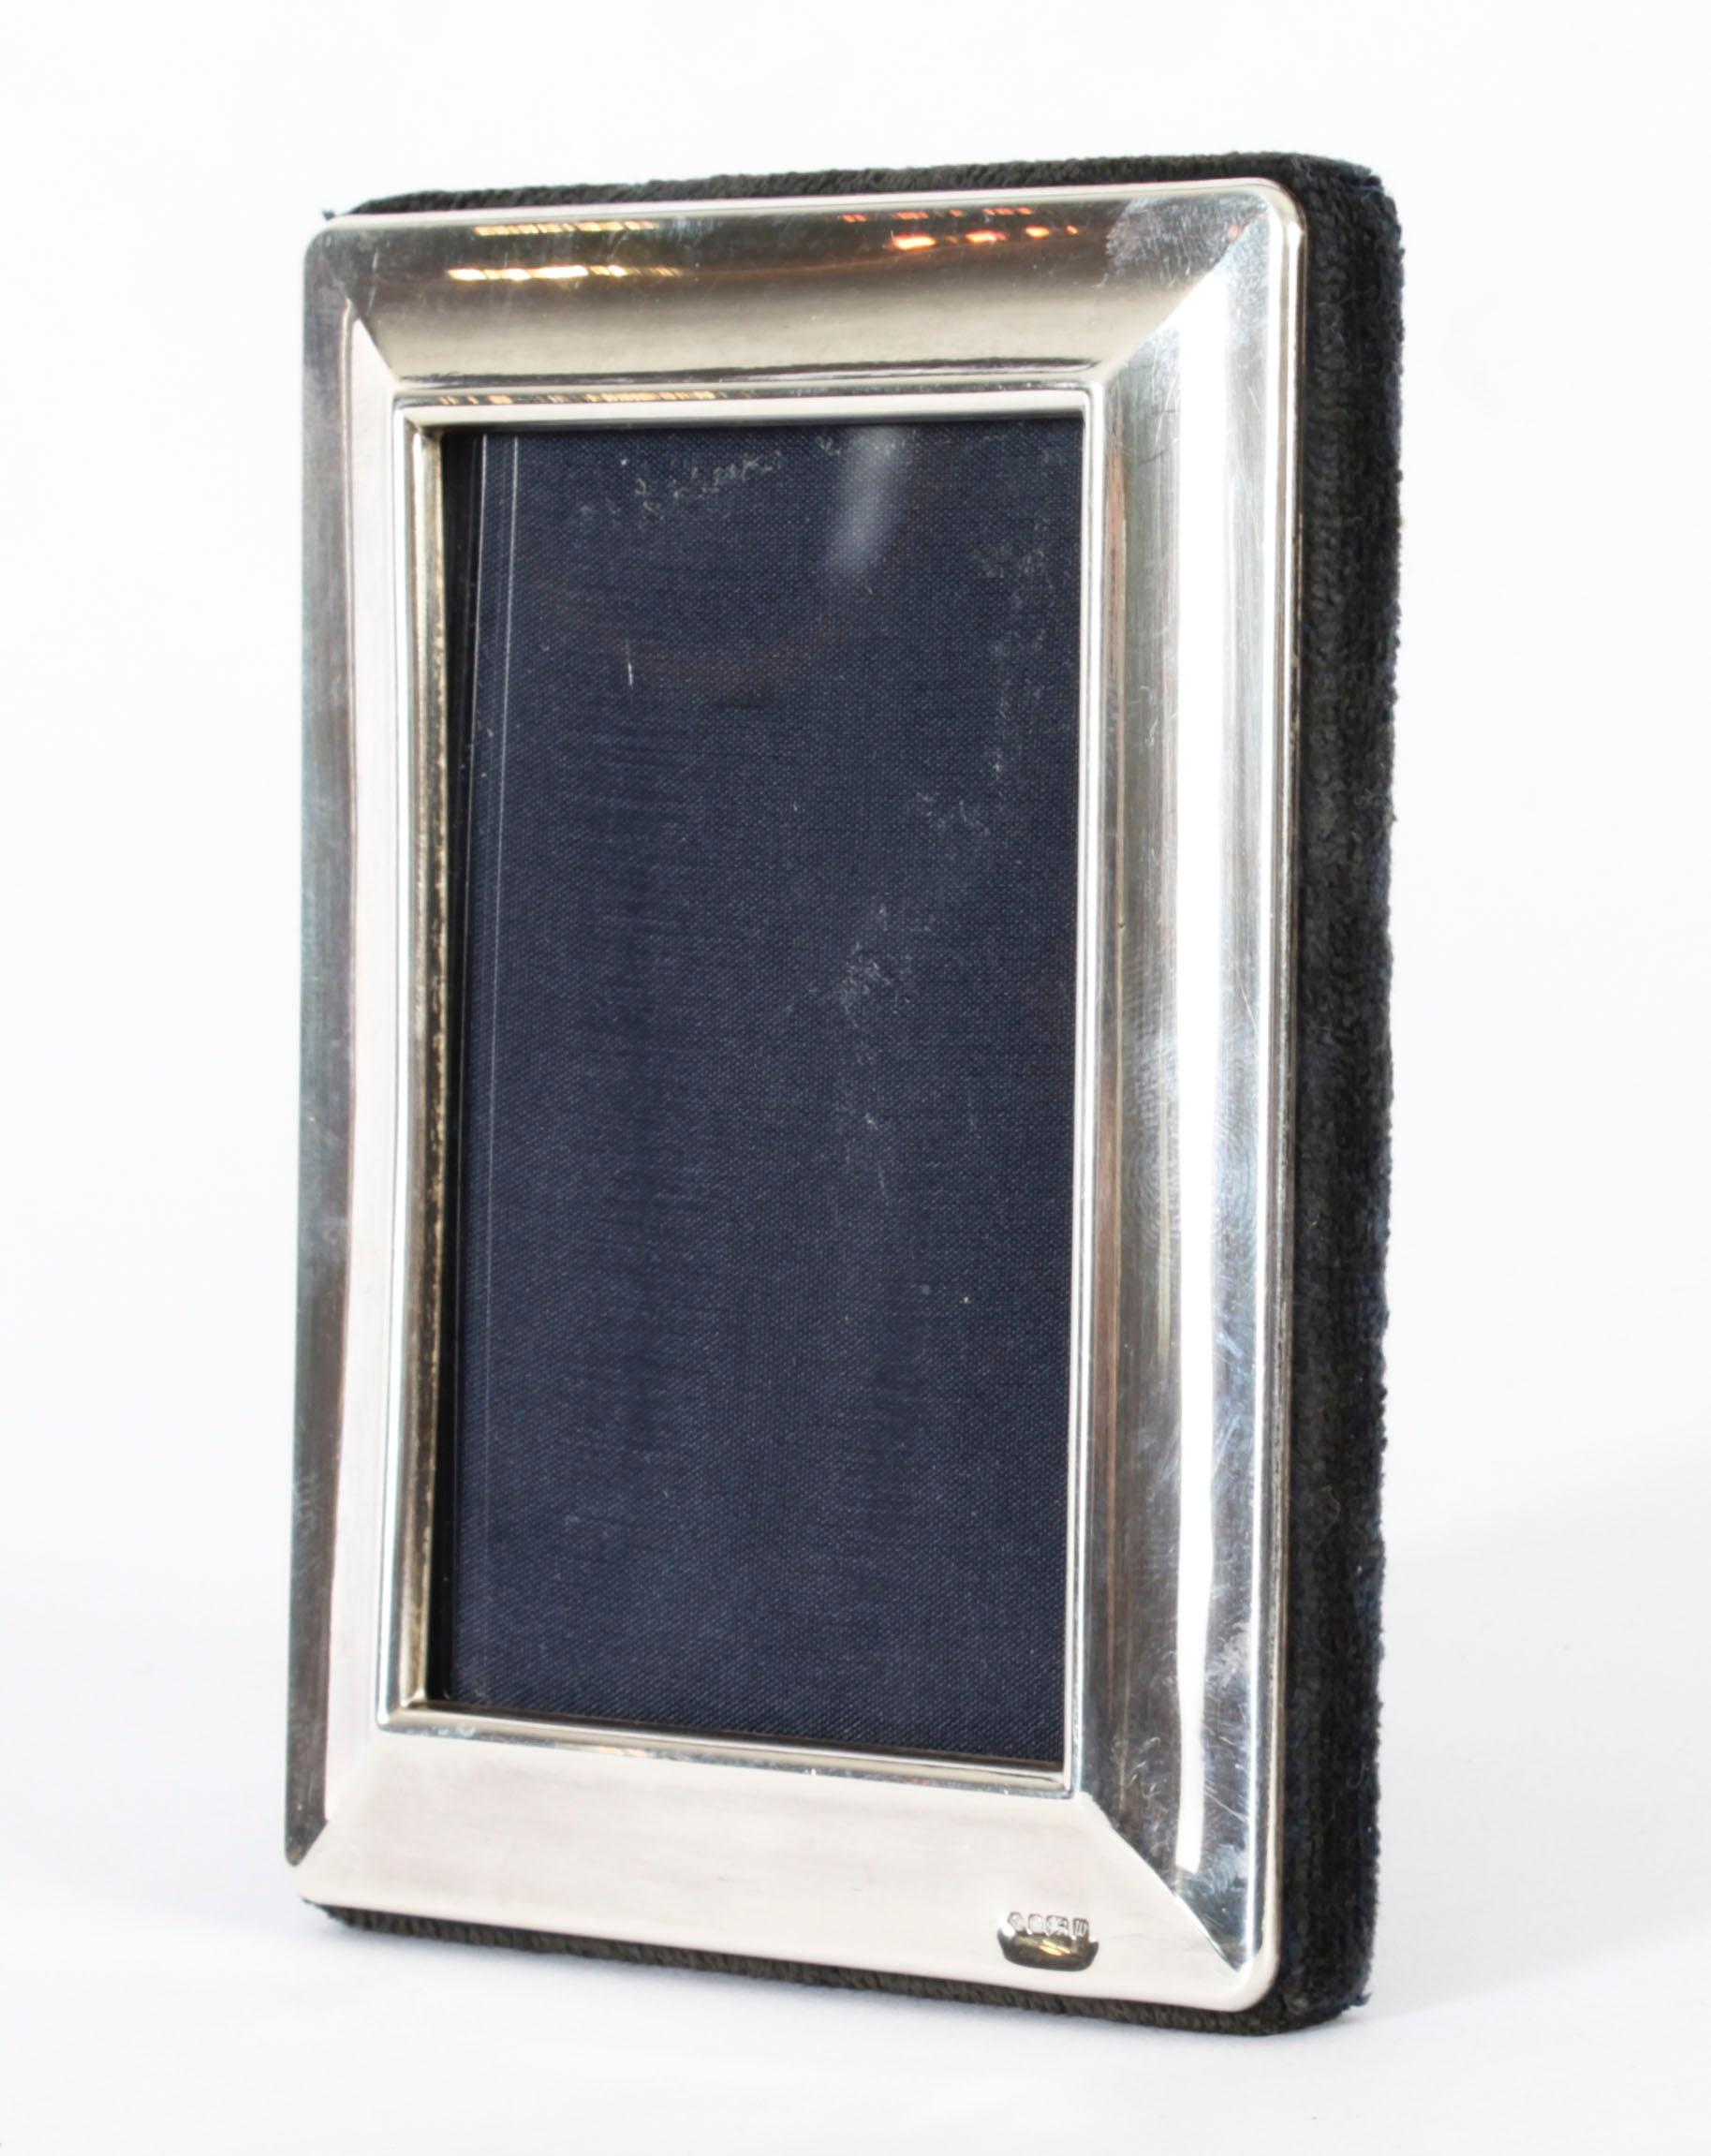 A superb decorative sterling silver photo frame by Carrs of Sheffield, with makers mark RC and hall marks for Sheffield 1996.
 
Beautiful portrait or landscape frame decorated with plain shaped borders. 
 
An excellent gift idea for many